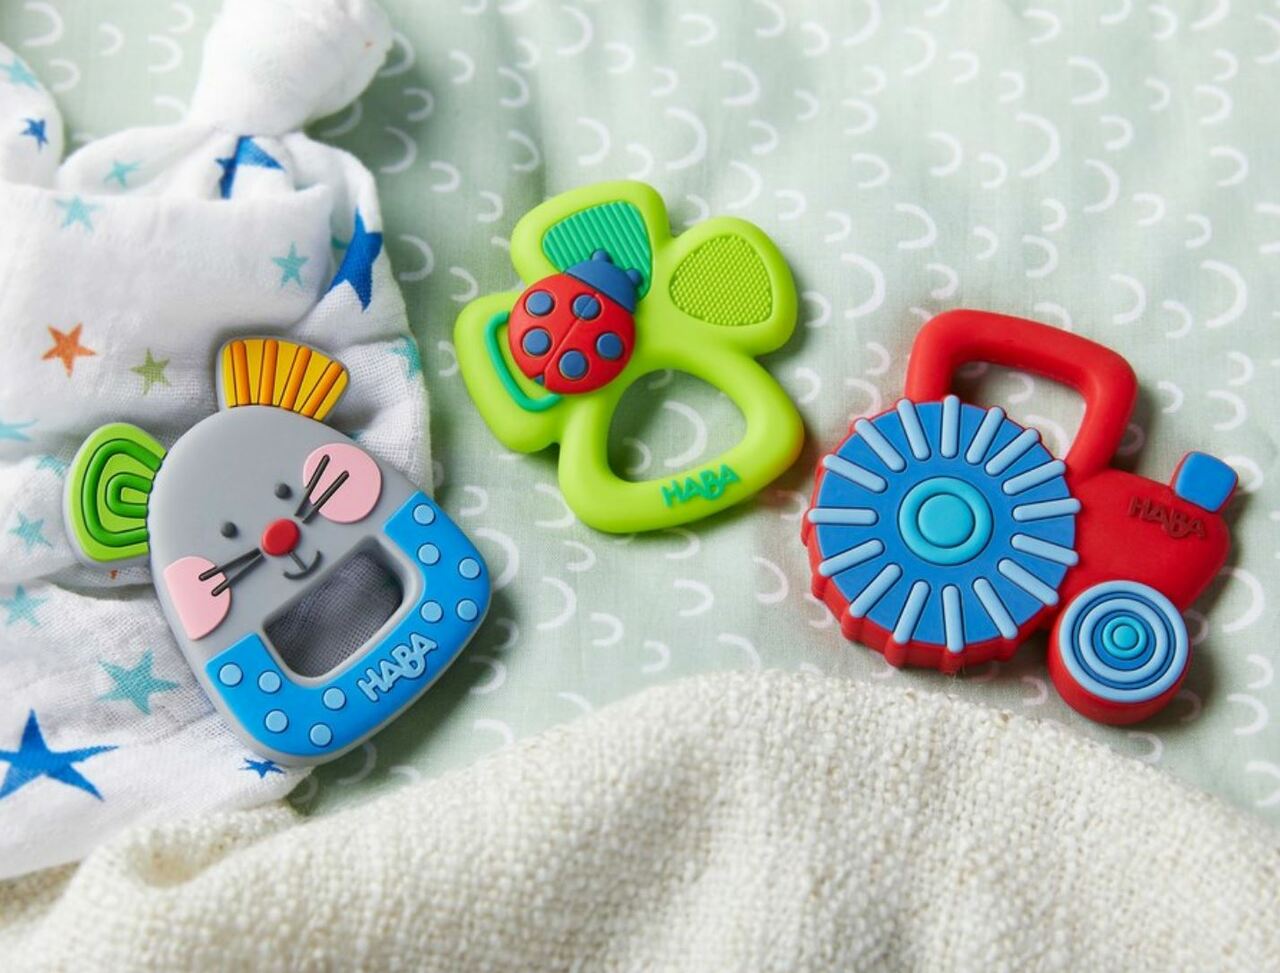 Haba Tractor Silicone Teether